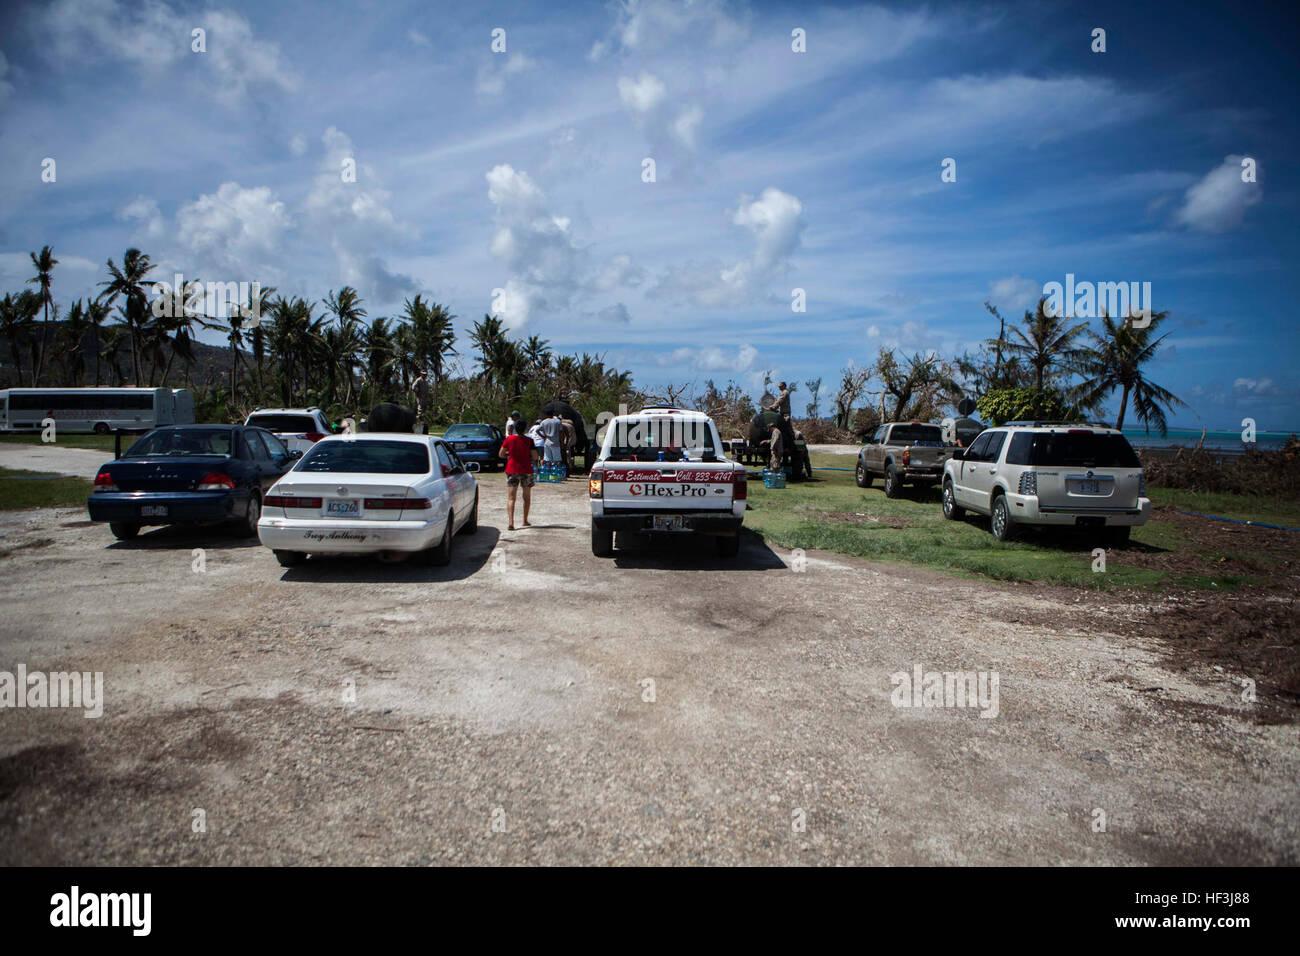 Vehicles wait in line as U.S. Marines with Combat Logistics Battalion 31, 31st Marine Expeditionary Unit, distribute water to local civilians during typhoon relief efforts in Saipan, Aug. 12, 2015. The 31st MEU and the ships of the Bonhomme Richard Amphibious Ready Group are assisting local and federal agencies with distributing emergency relief supplies to Saipan after the island was struck by Typhoon Soudelor Aug. 2-3. (U.S. Marine Corps photo by Gunnery Sgt. Ismael Pena/Released) Marines bring clean water to people of Saipan 150812-M-MX588-152 Stock Photo